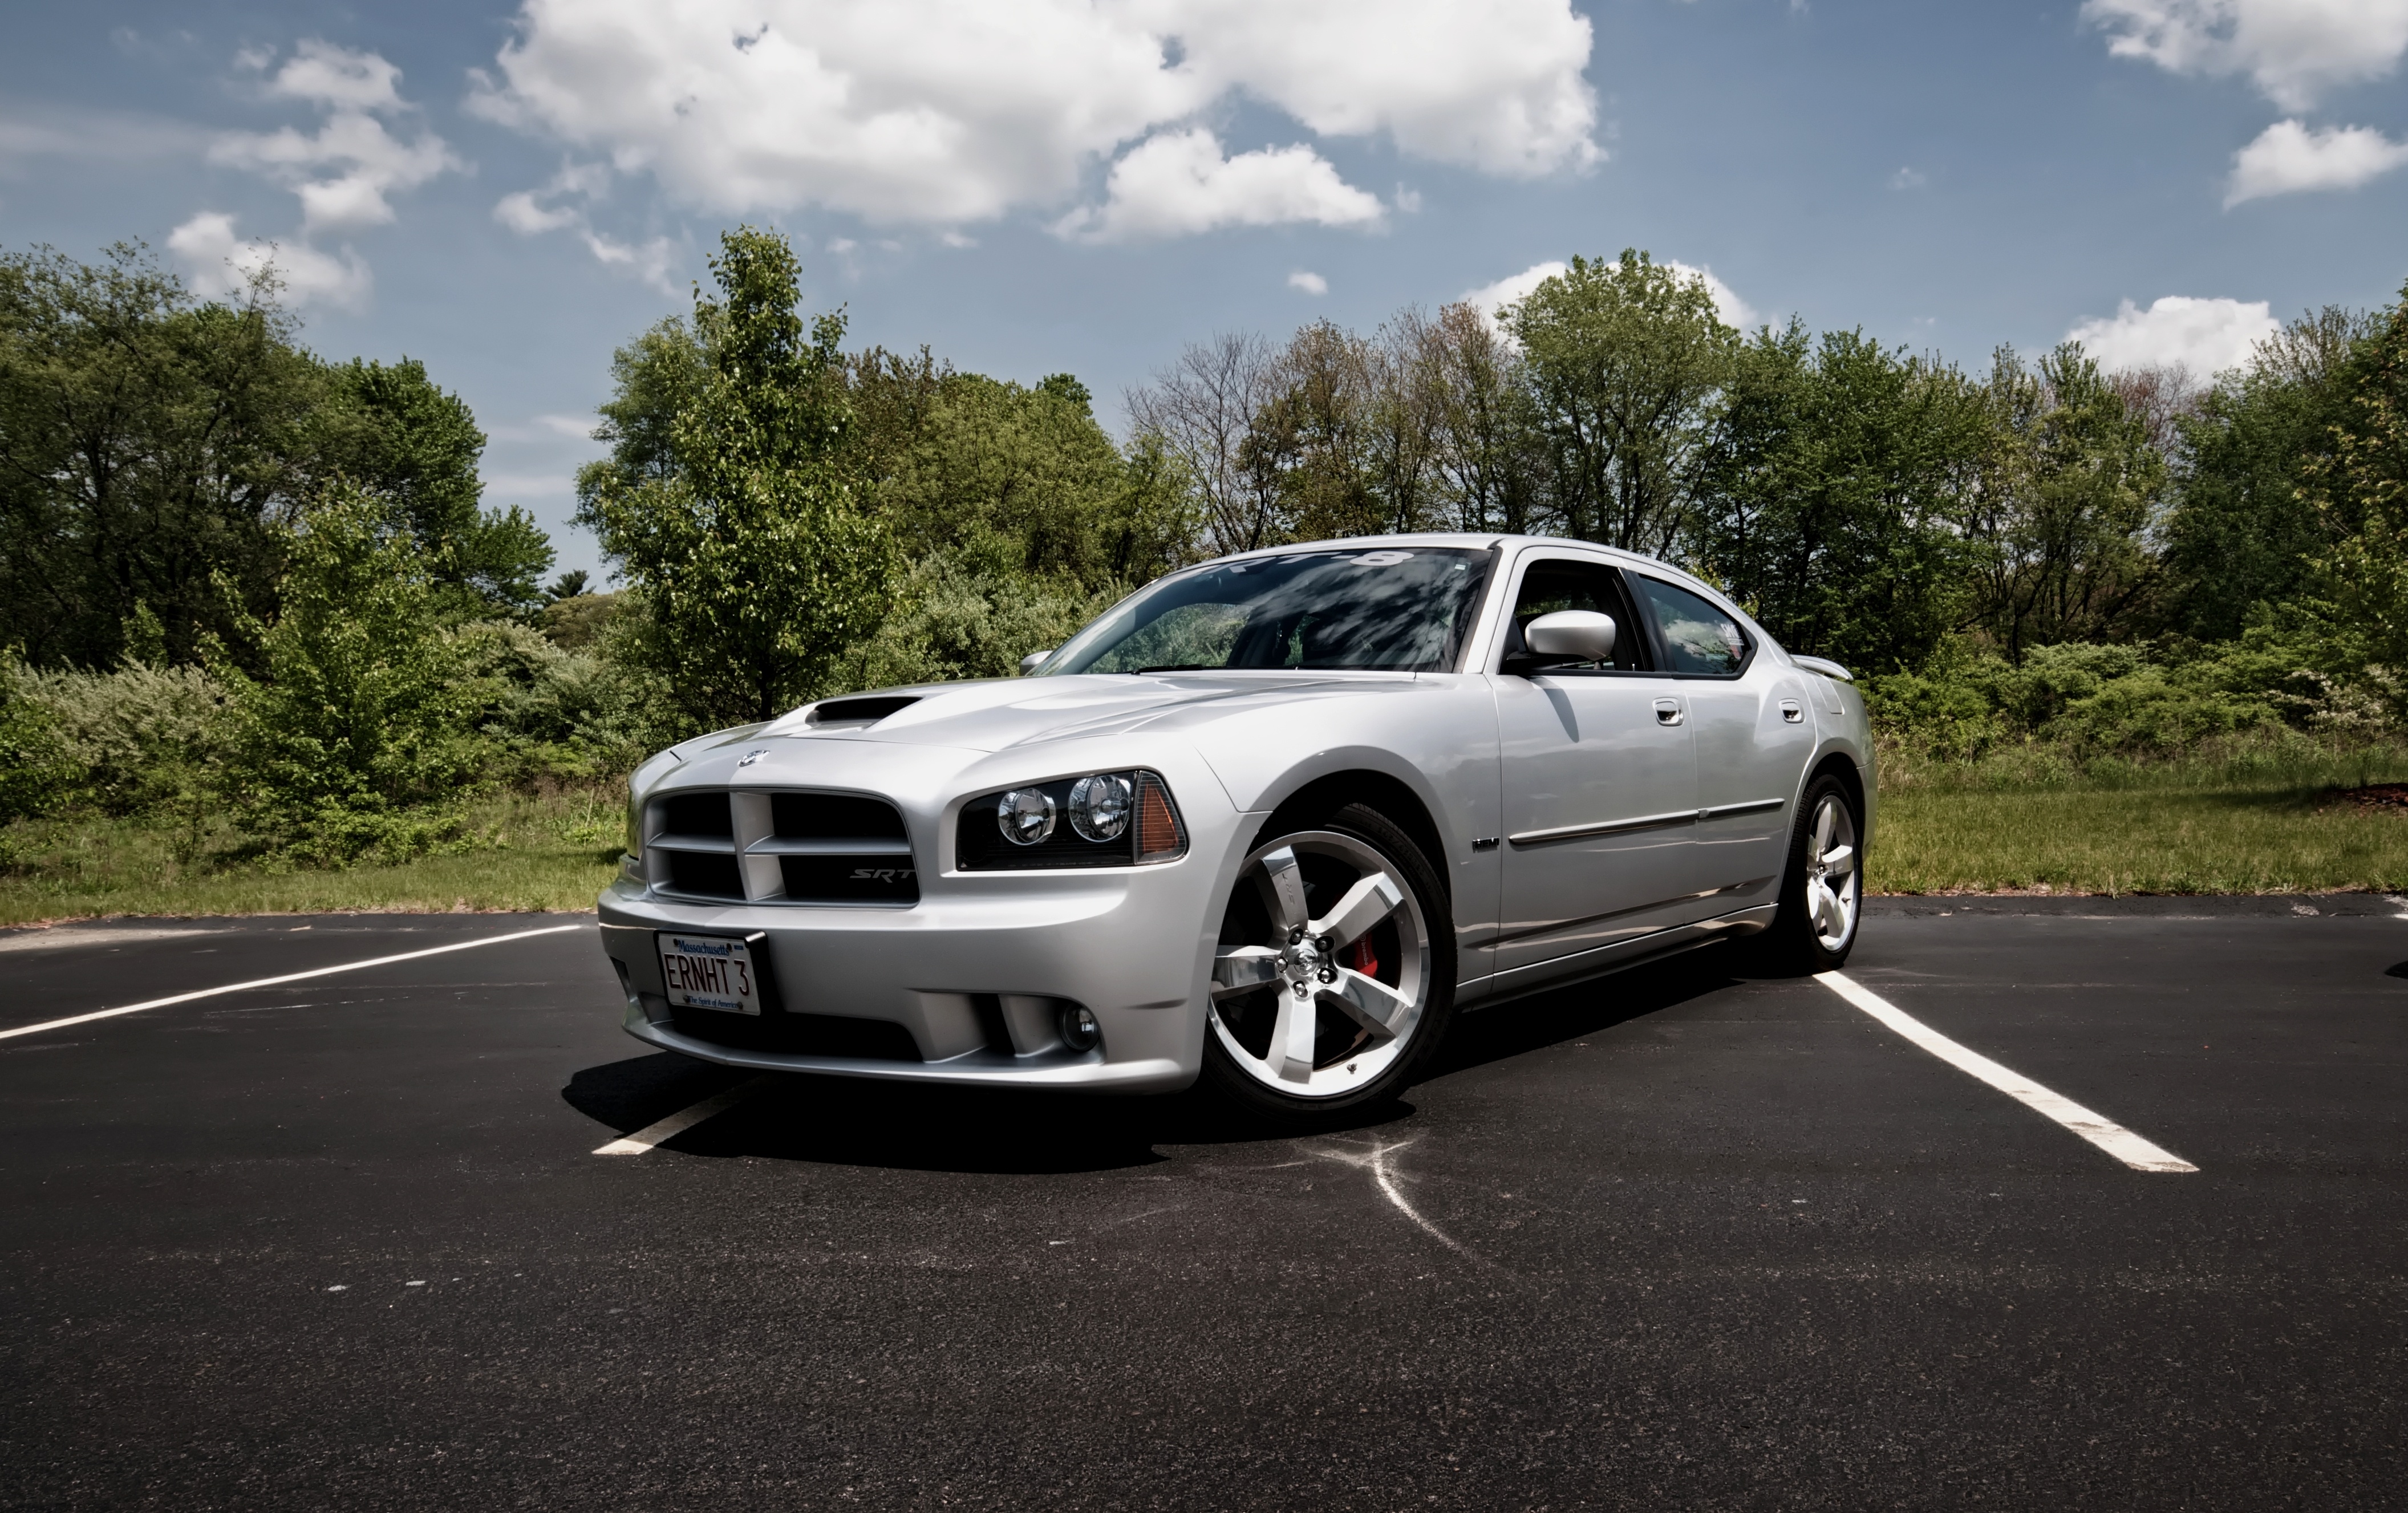 Windows Backgrounds supercar, tuning, cars, silver, dodge charger srt8, cult car, functional hood